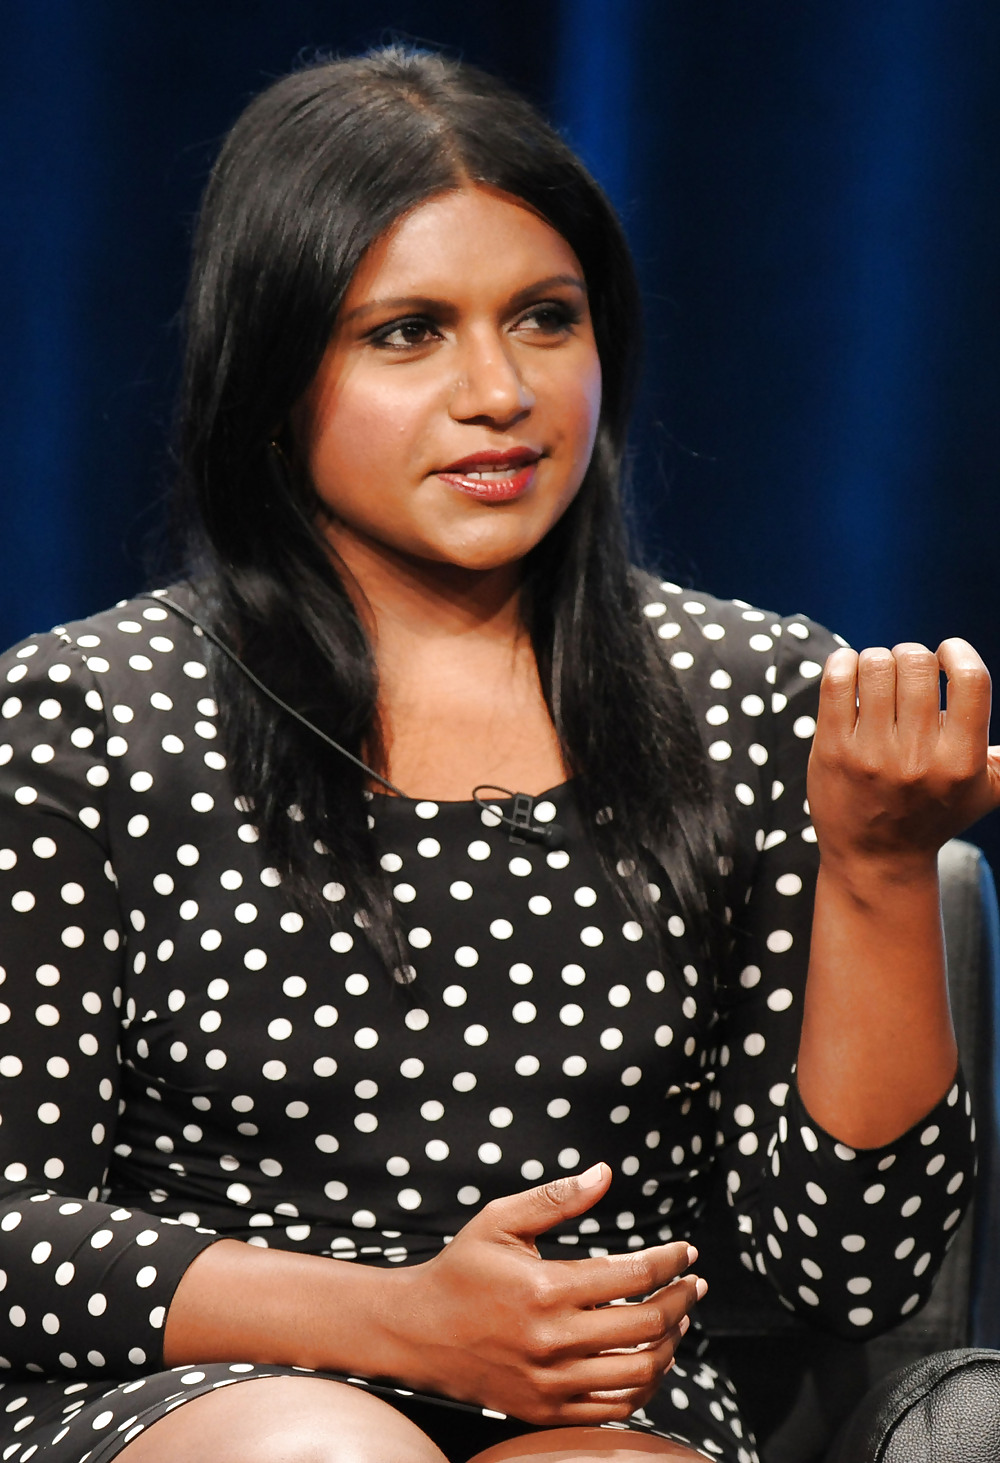 Hot Indian comedian Mindy Kaling - What would you do to her? #16251045